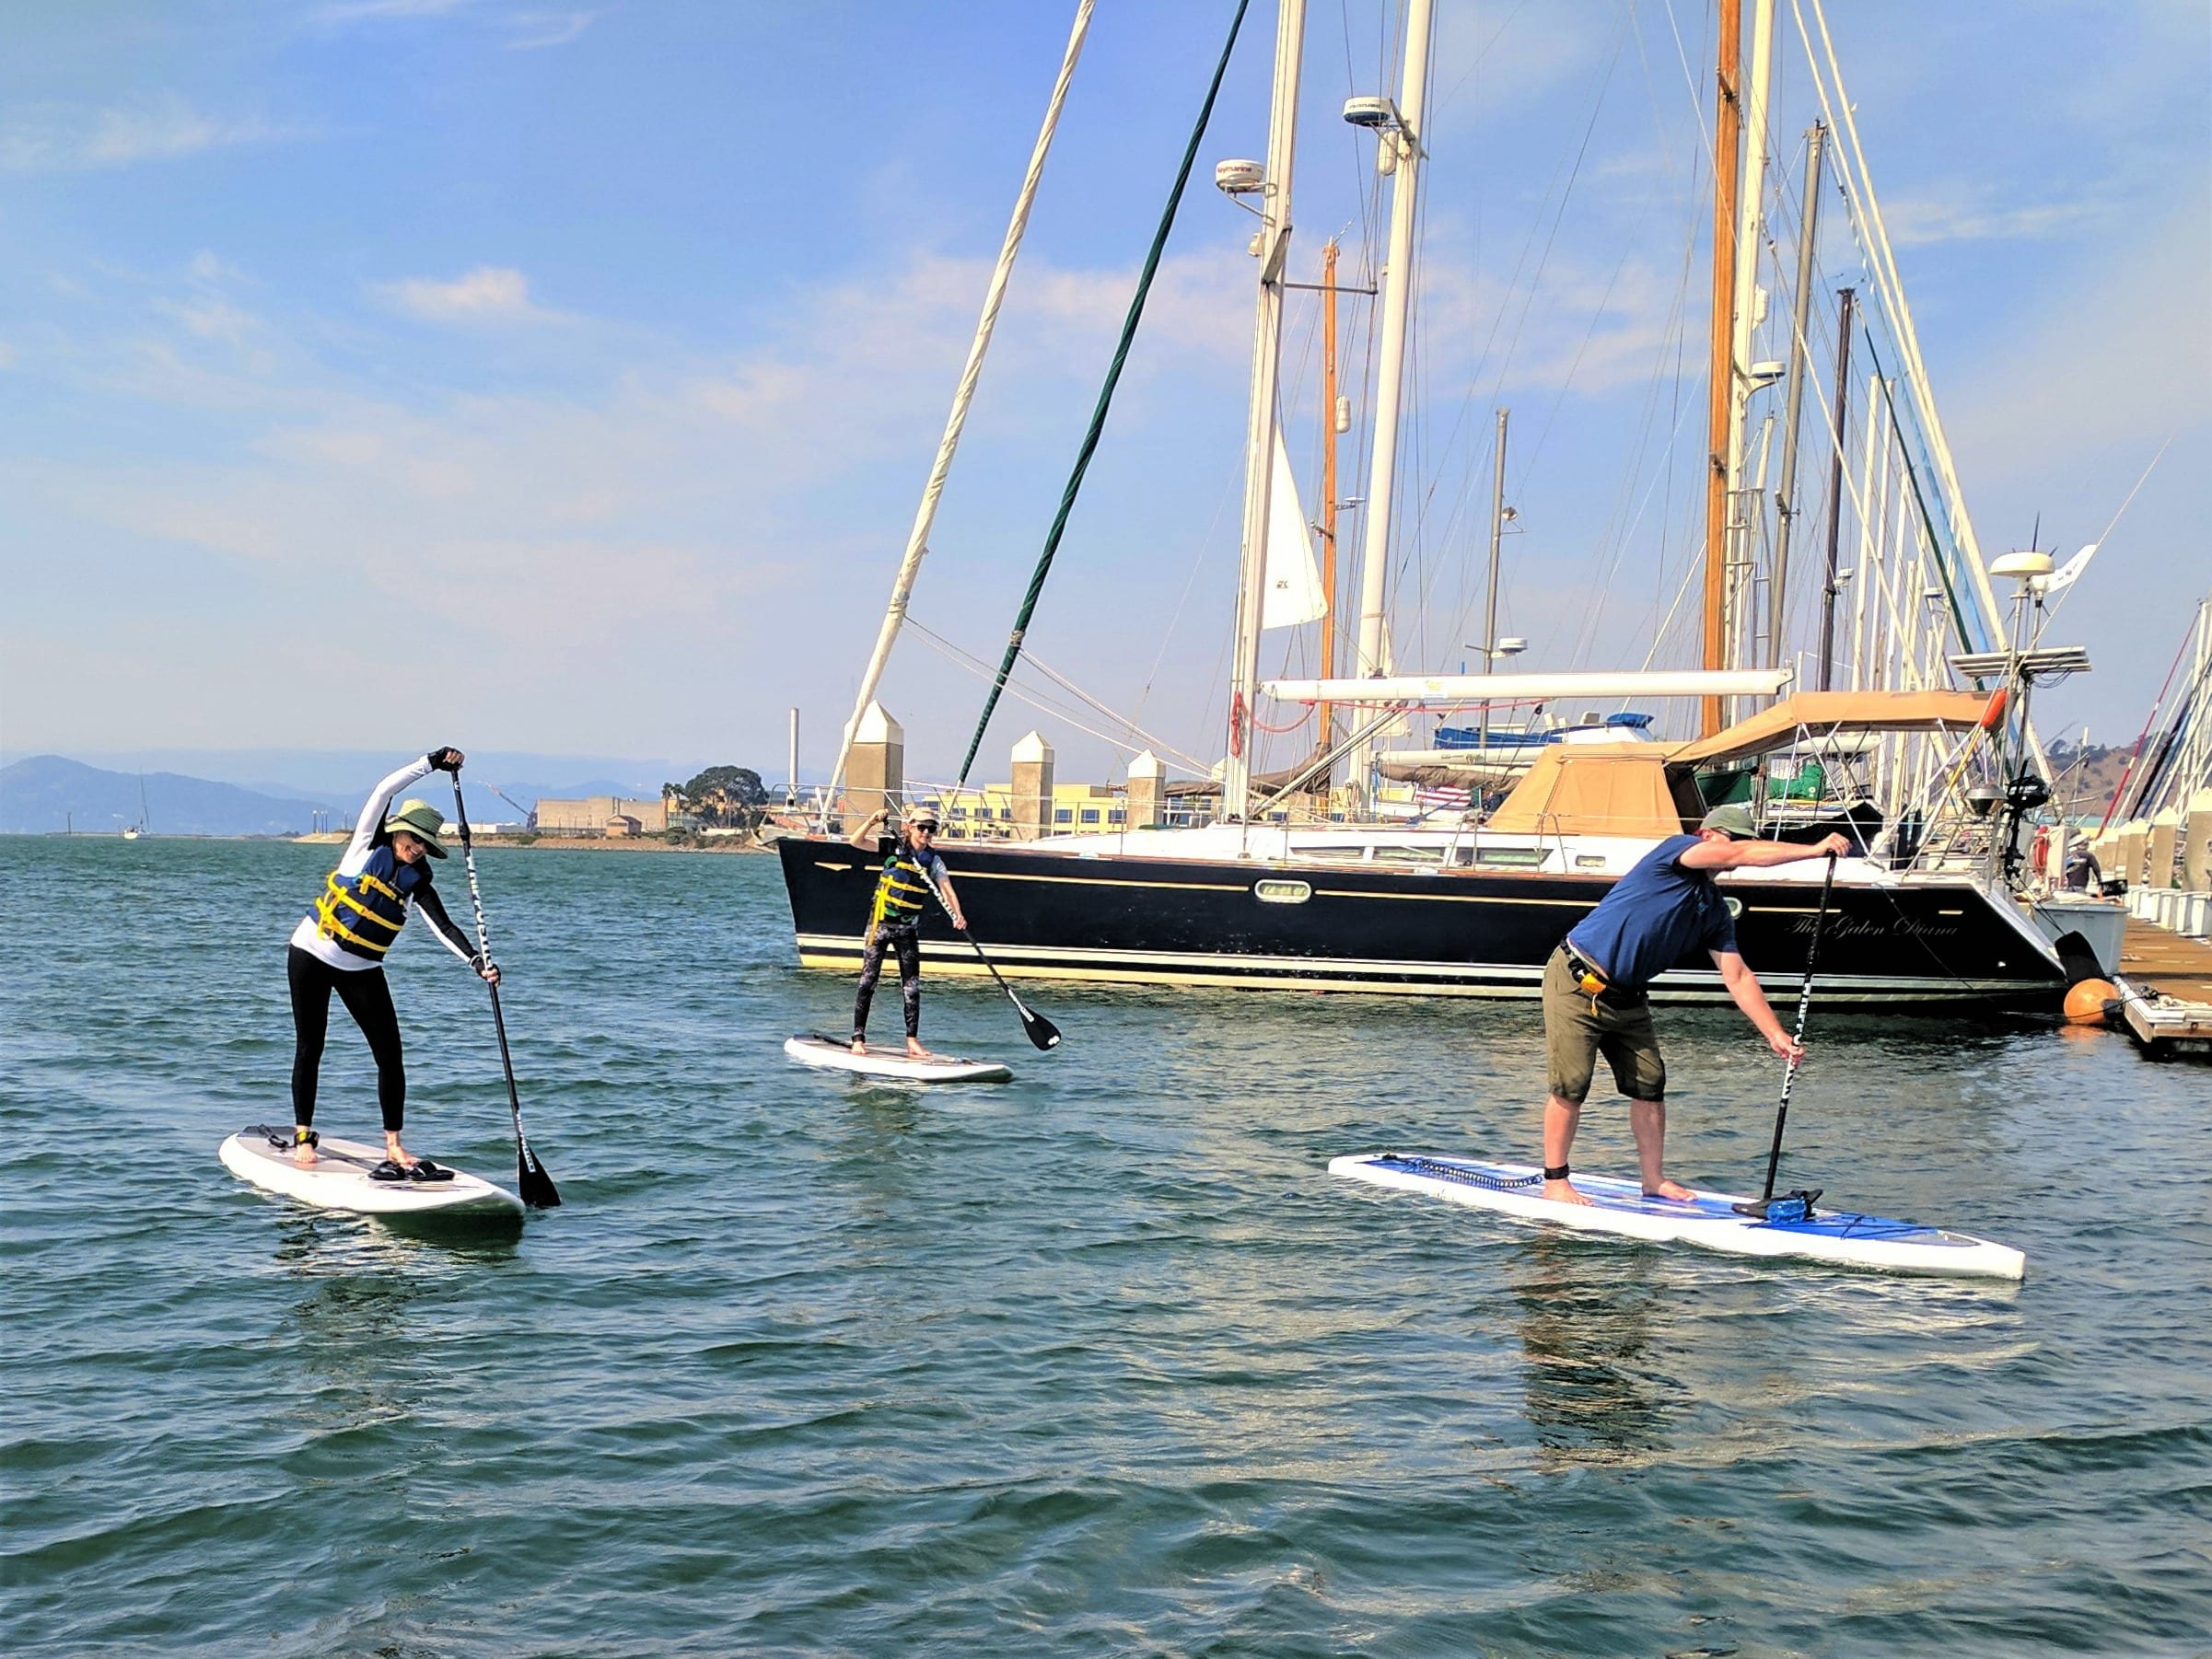 501 Waterline’s SUP ‘Just Paddle’ group